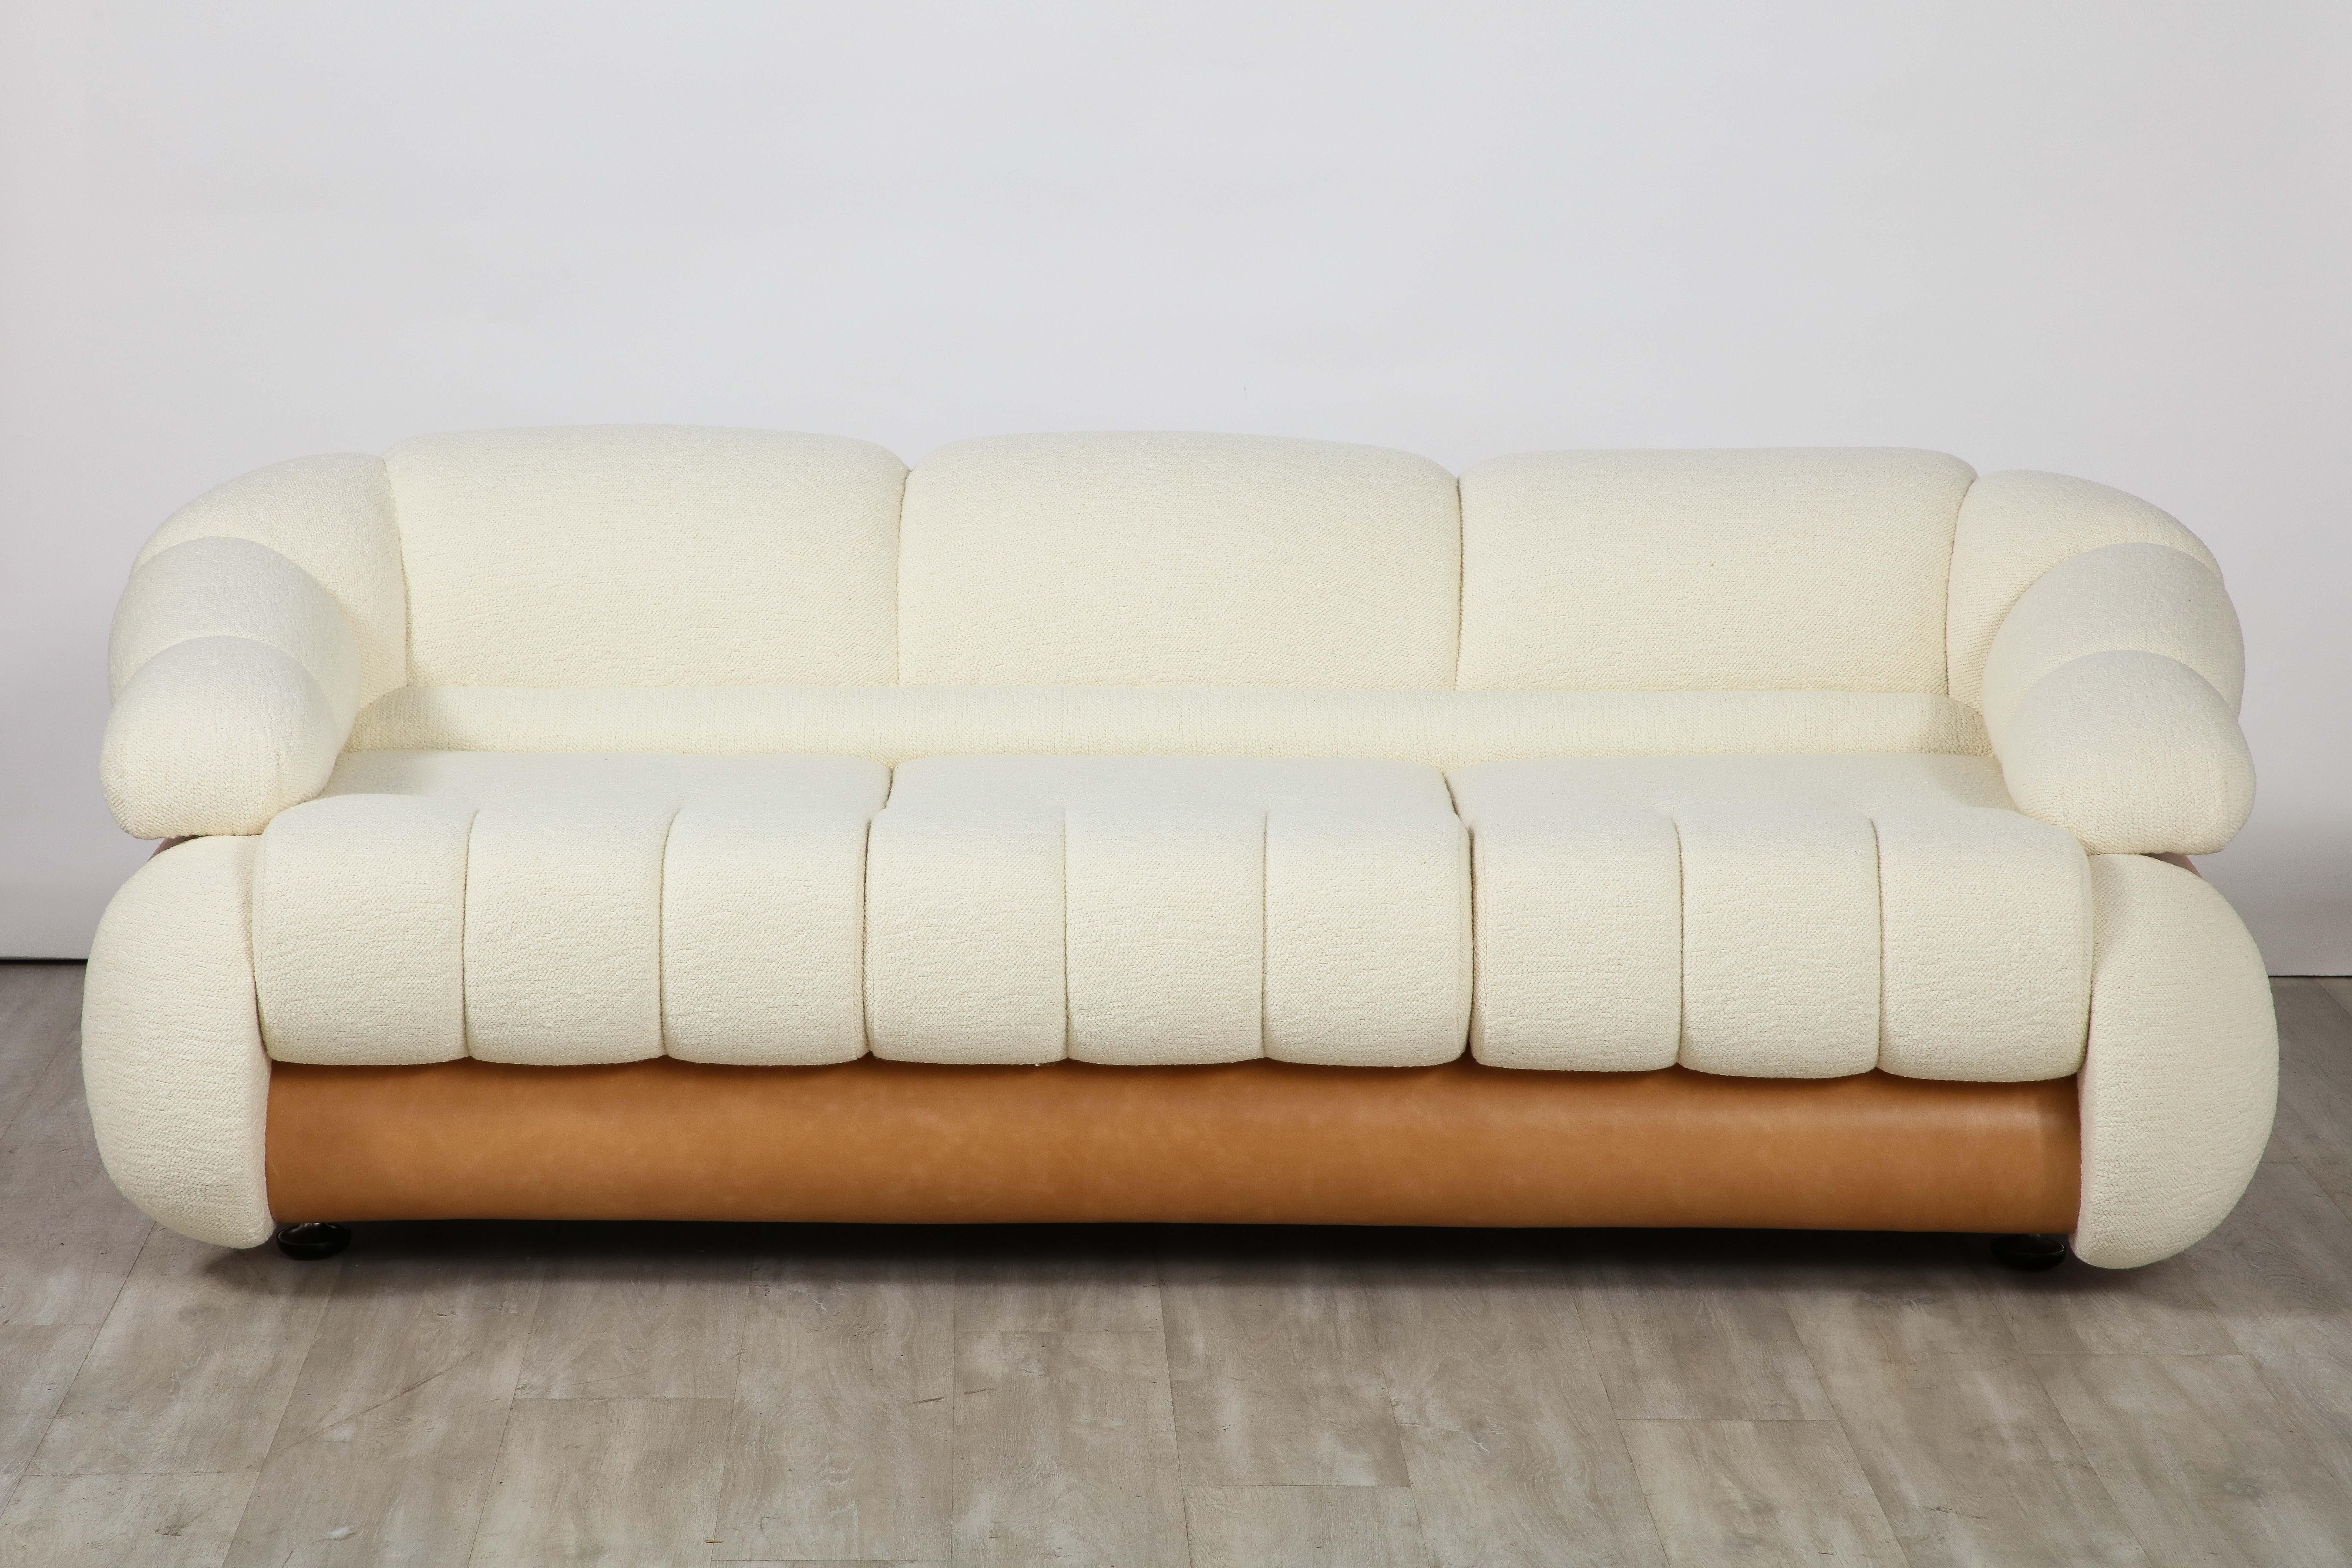 Adriano Piazzesi Italian 1970's Channel Tufted Sofa In Good Condition For Sale In New York, NY